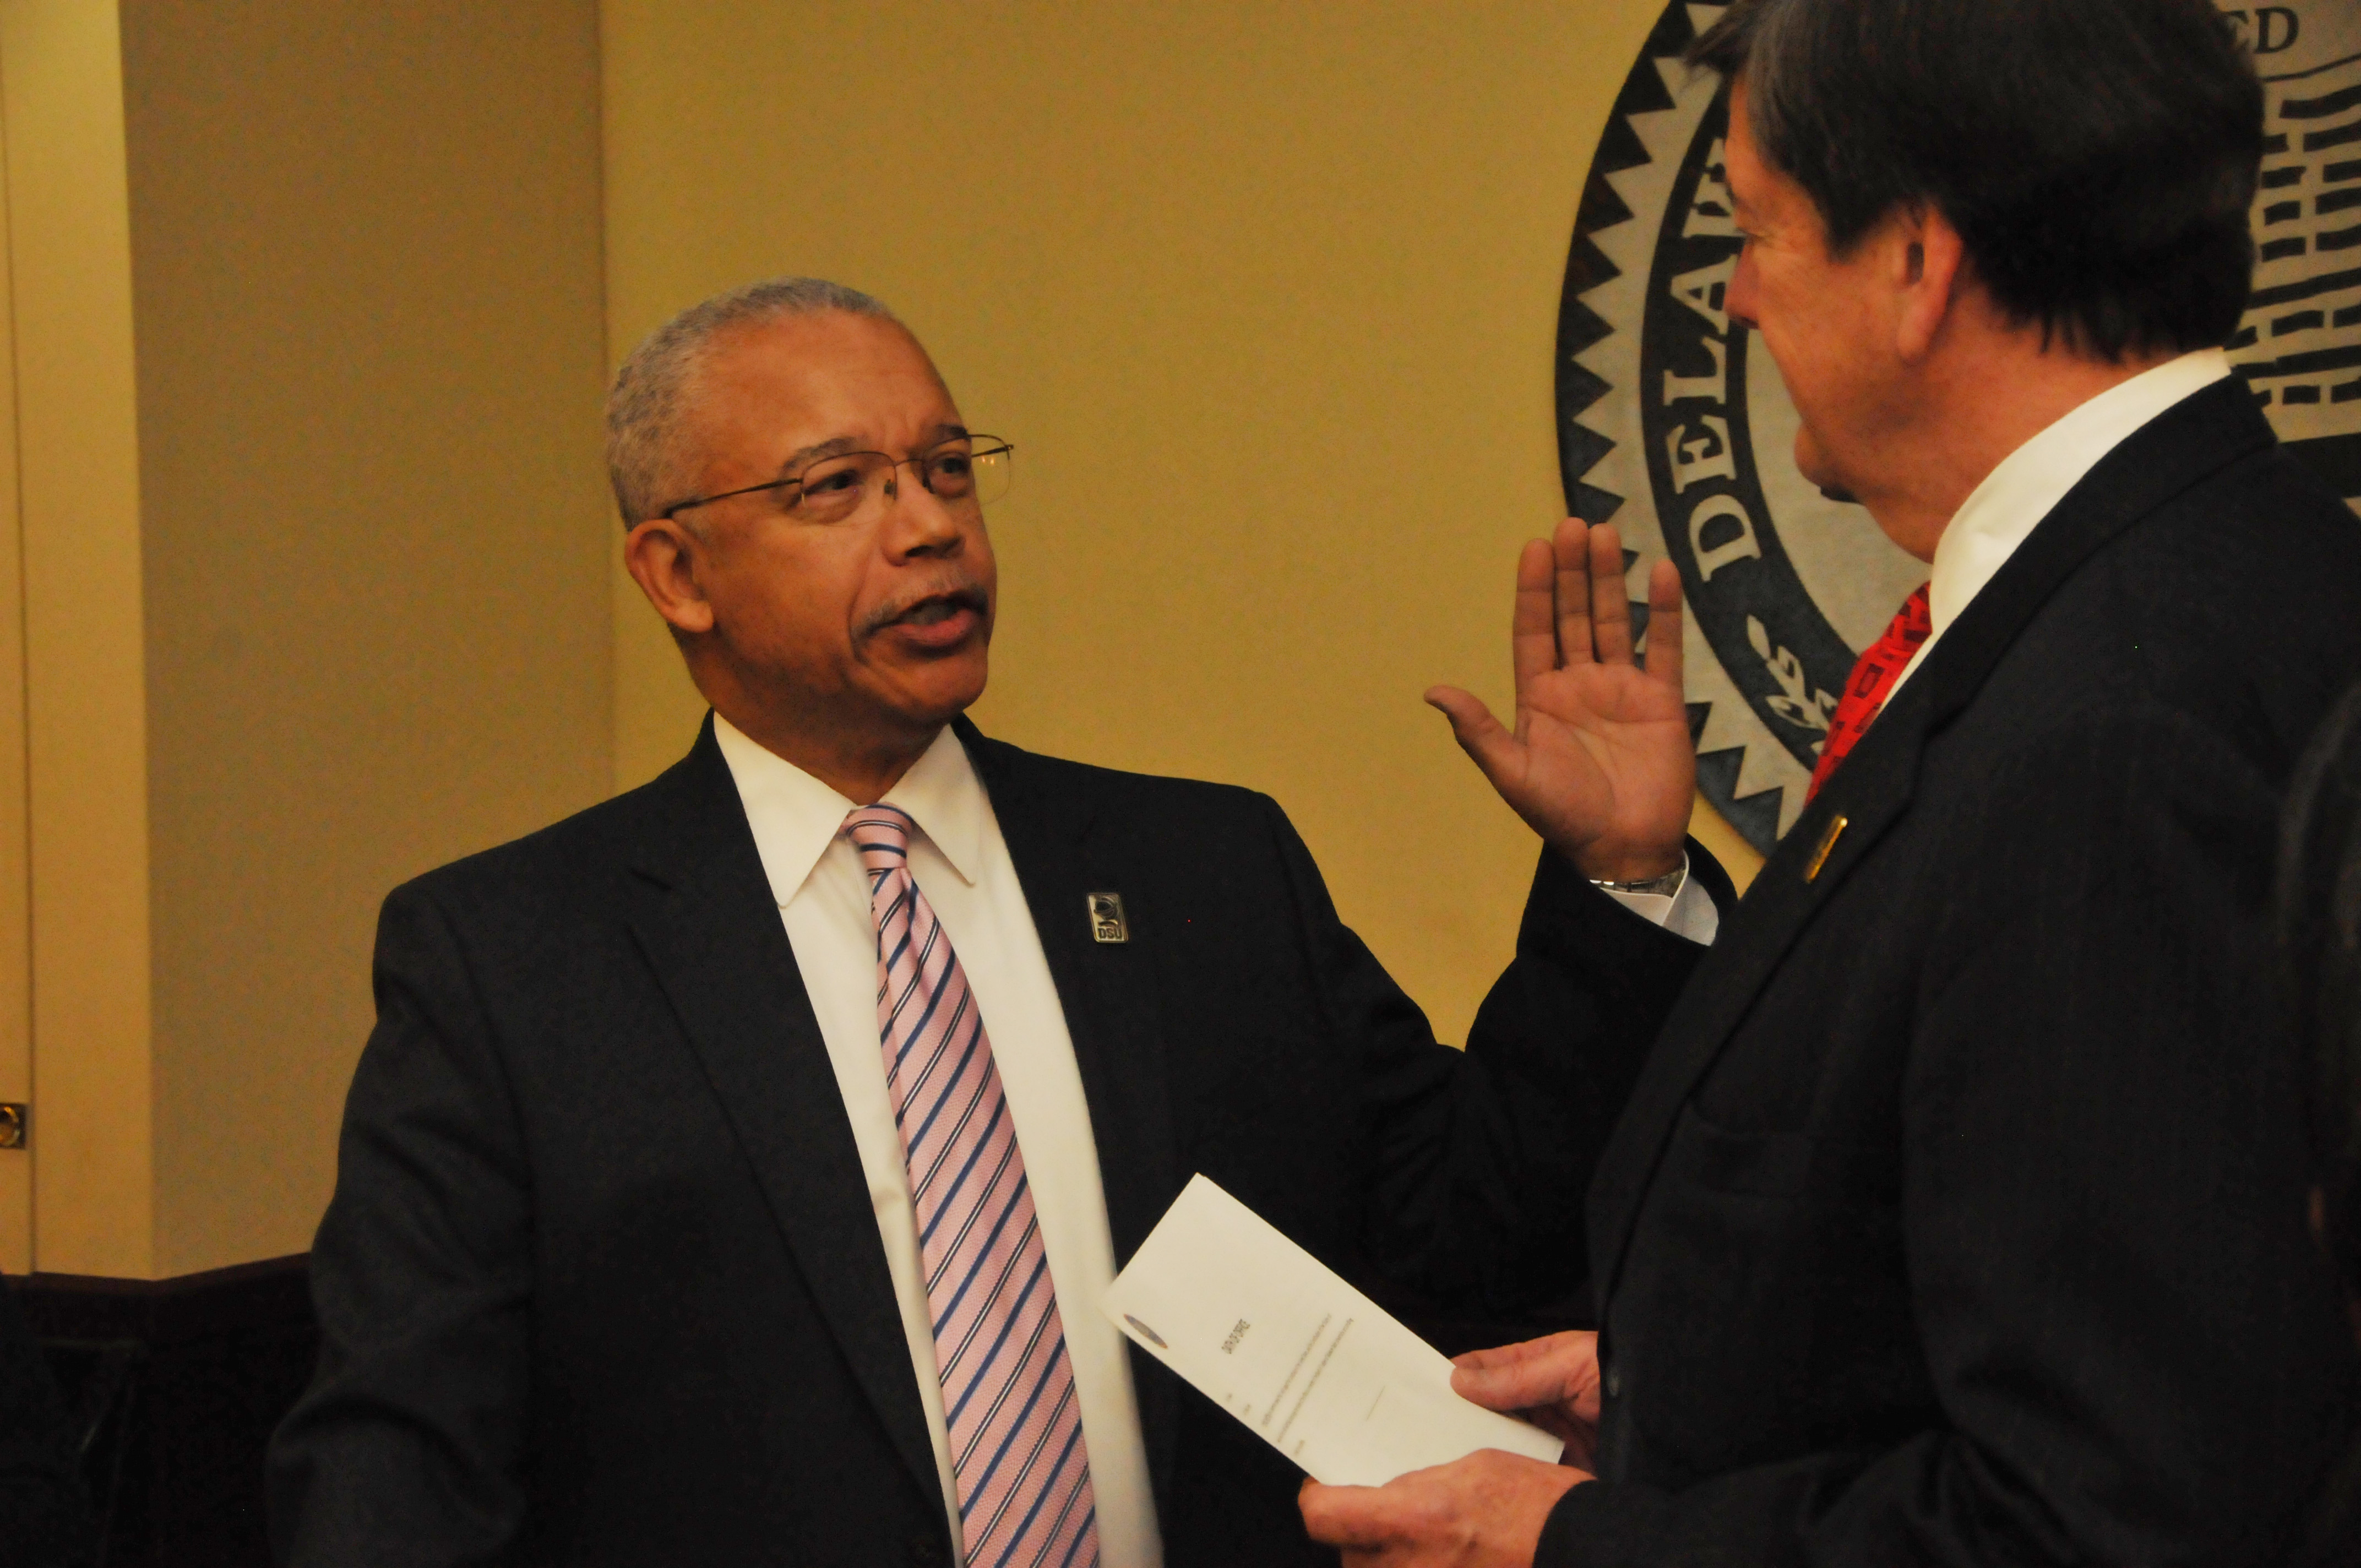 Norman D. Griffiths is sworn in as a new trustee by Tom Preston, interim general counsel, during the DSU Board of Trustees' Jan. 30 public meeting.